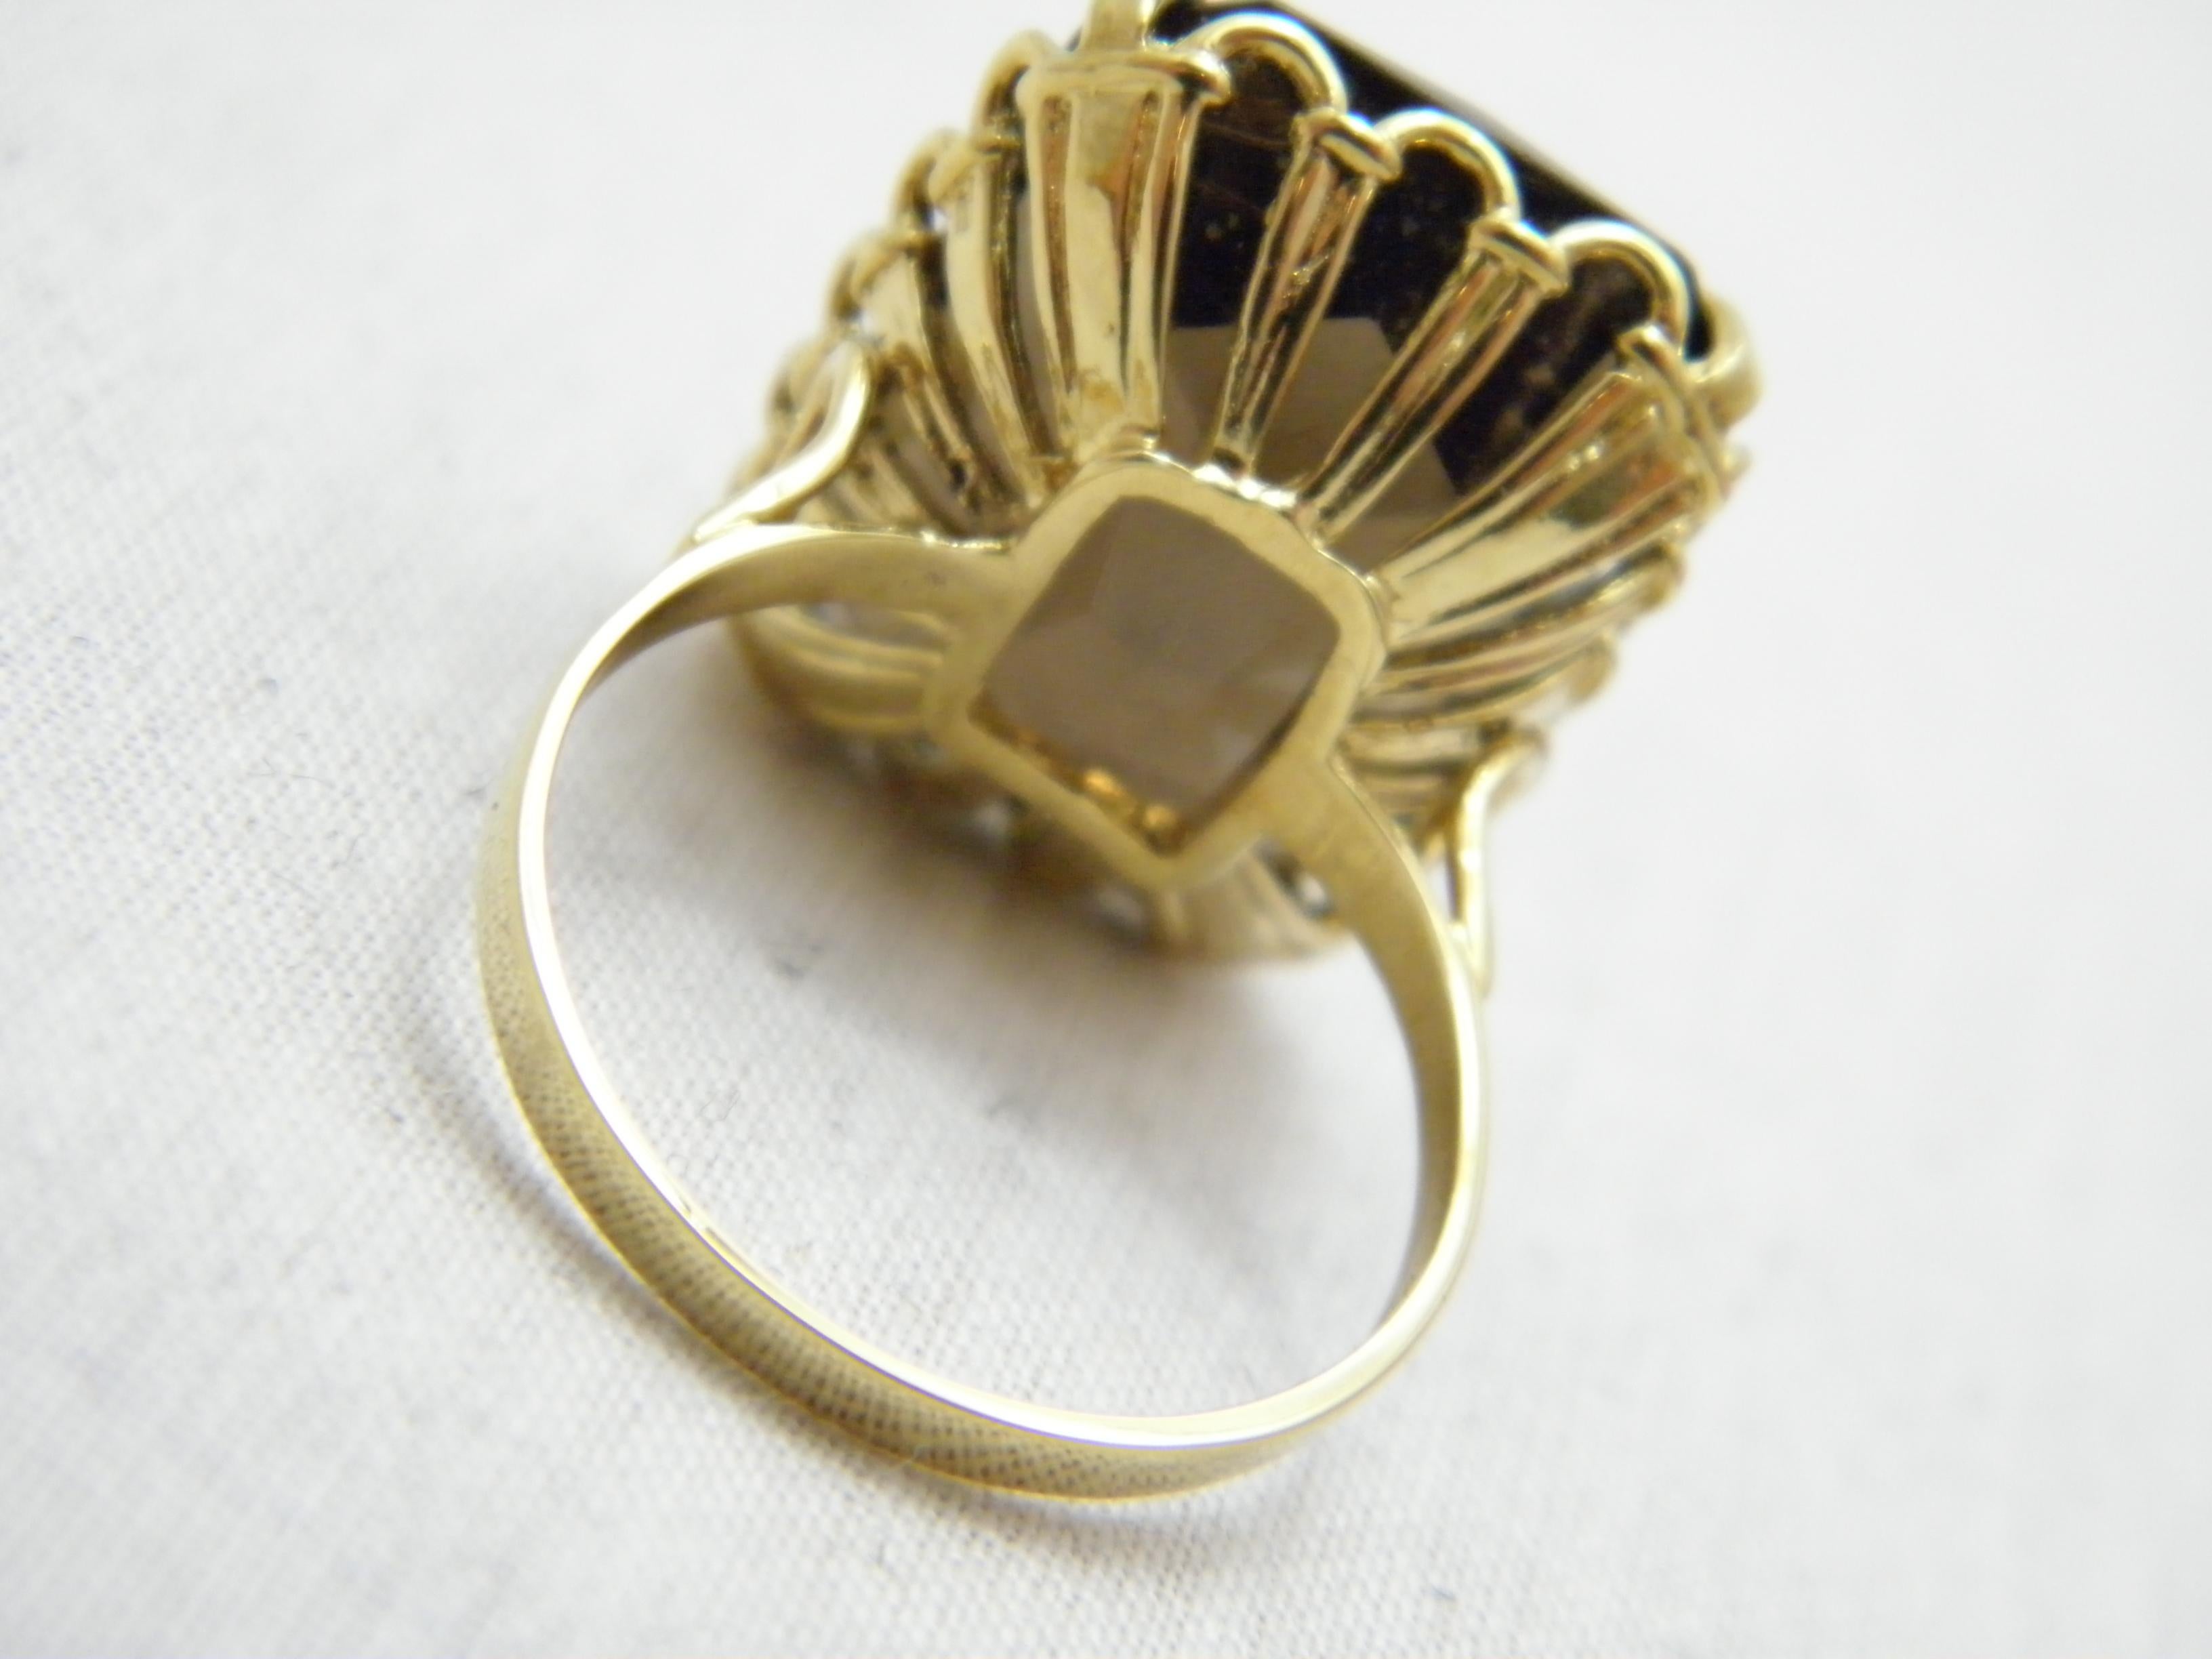 Vintage Smoky Quartz 18ct Gold Statement Signet Ring Size Q 8.25 750 Purity In Good Condition For Sale In Camelford, GB